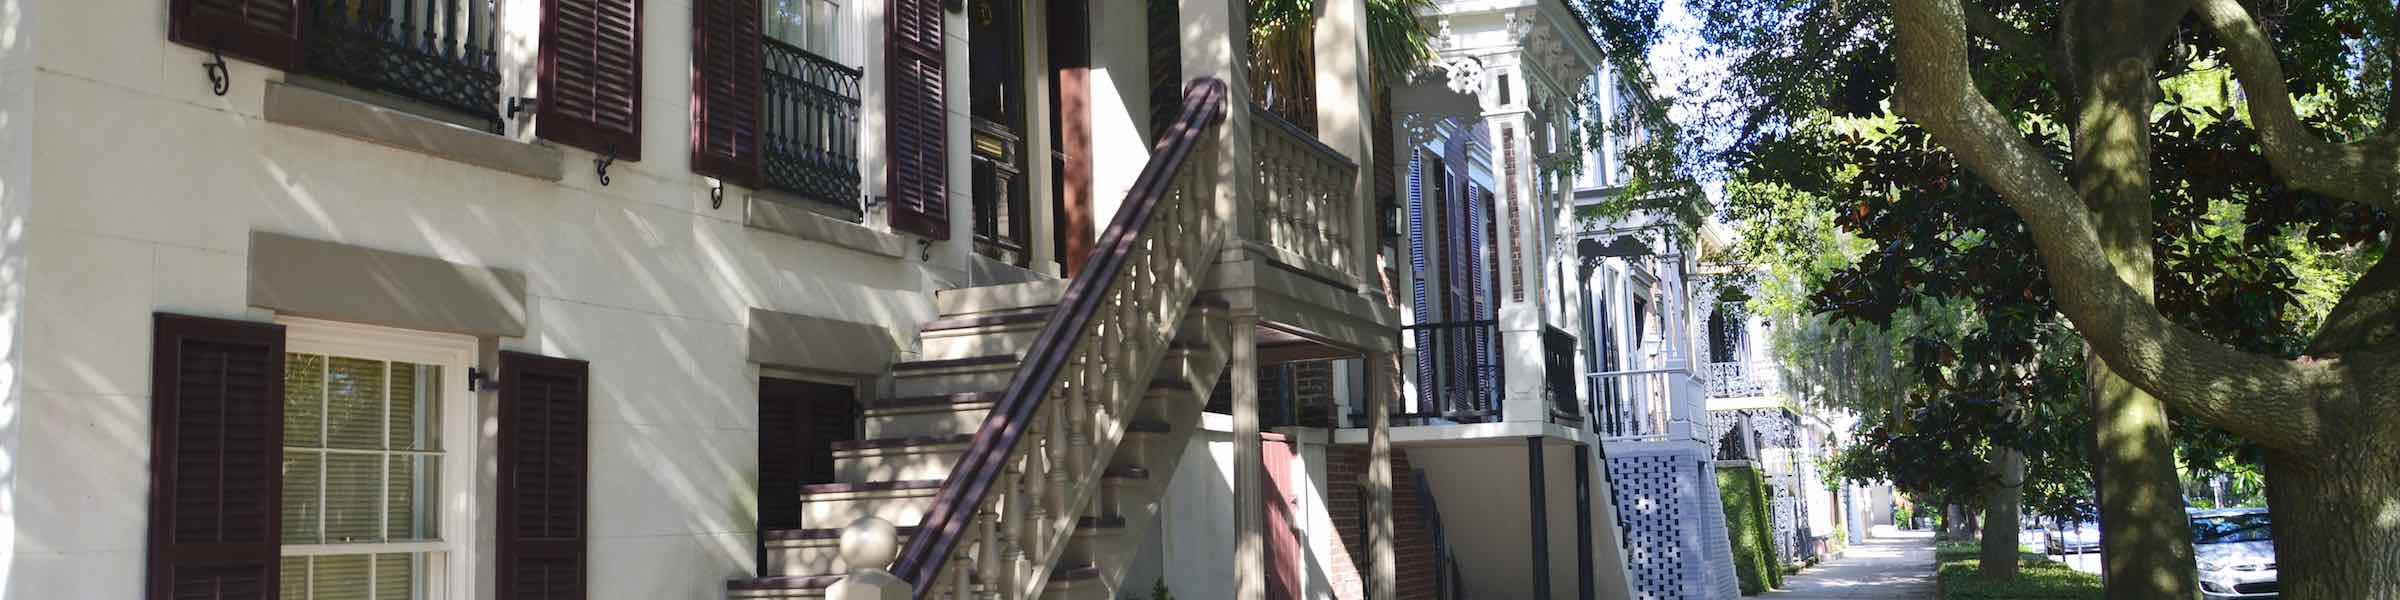 A view of historic houses along a street in Savannah's Historic District.